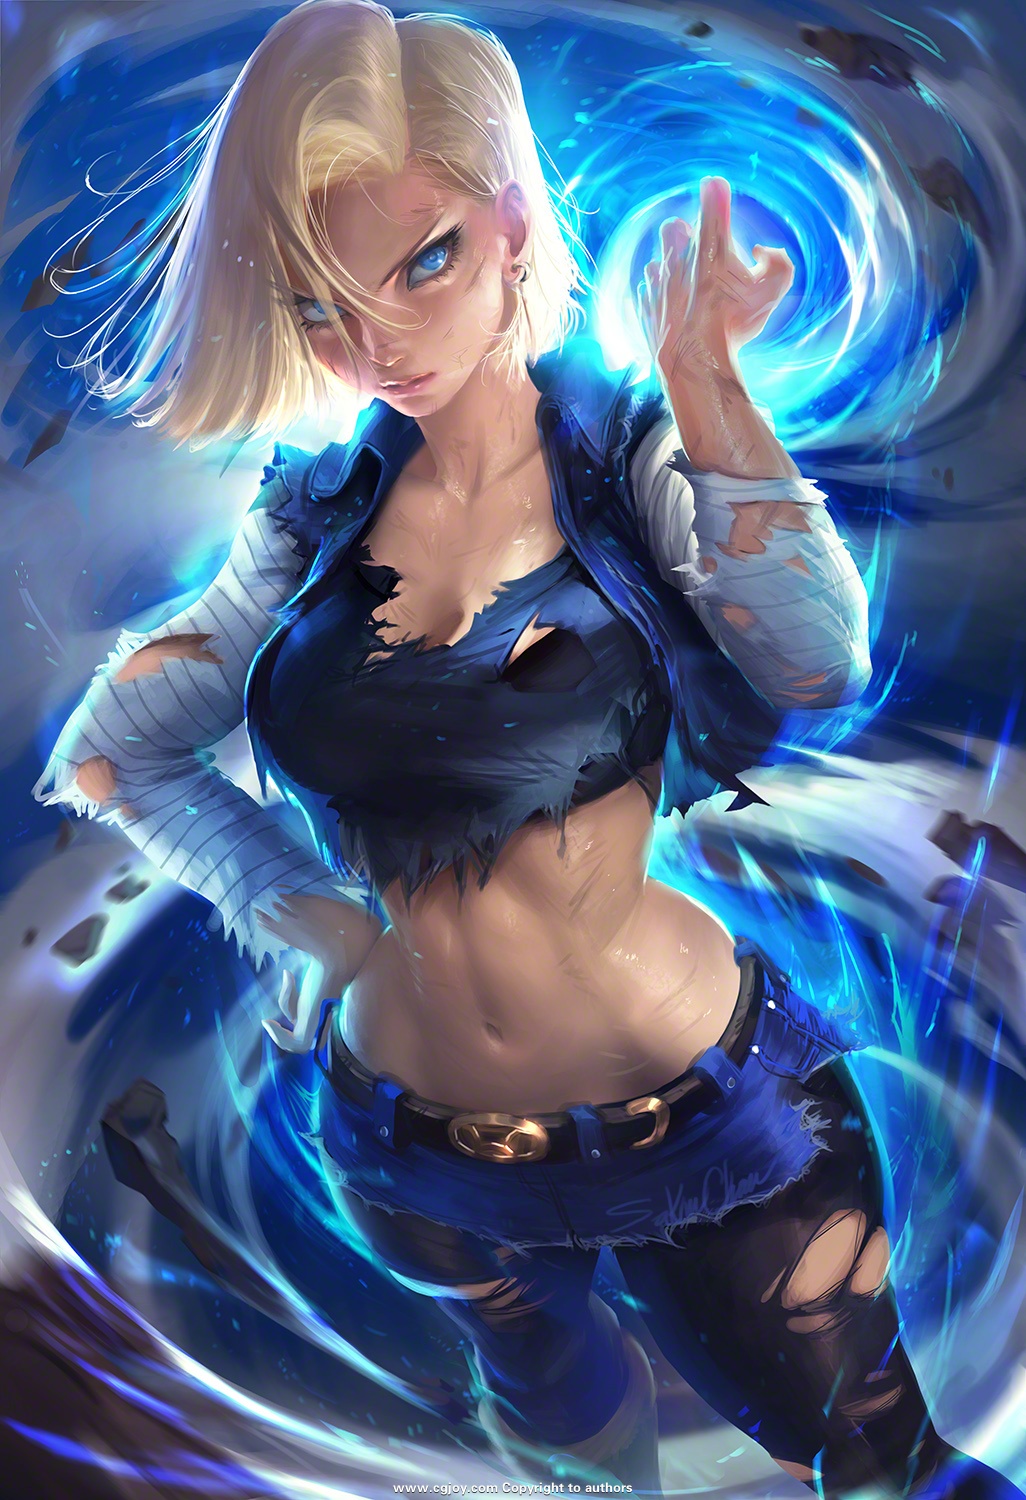 Android 18 (1).jpg